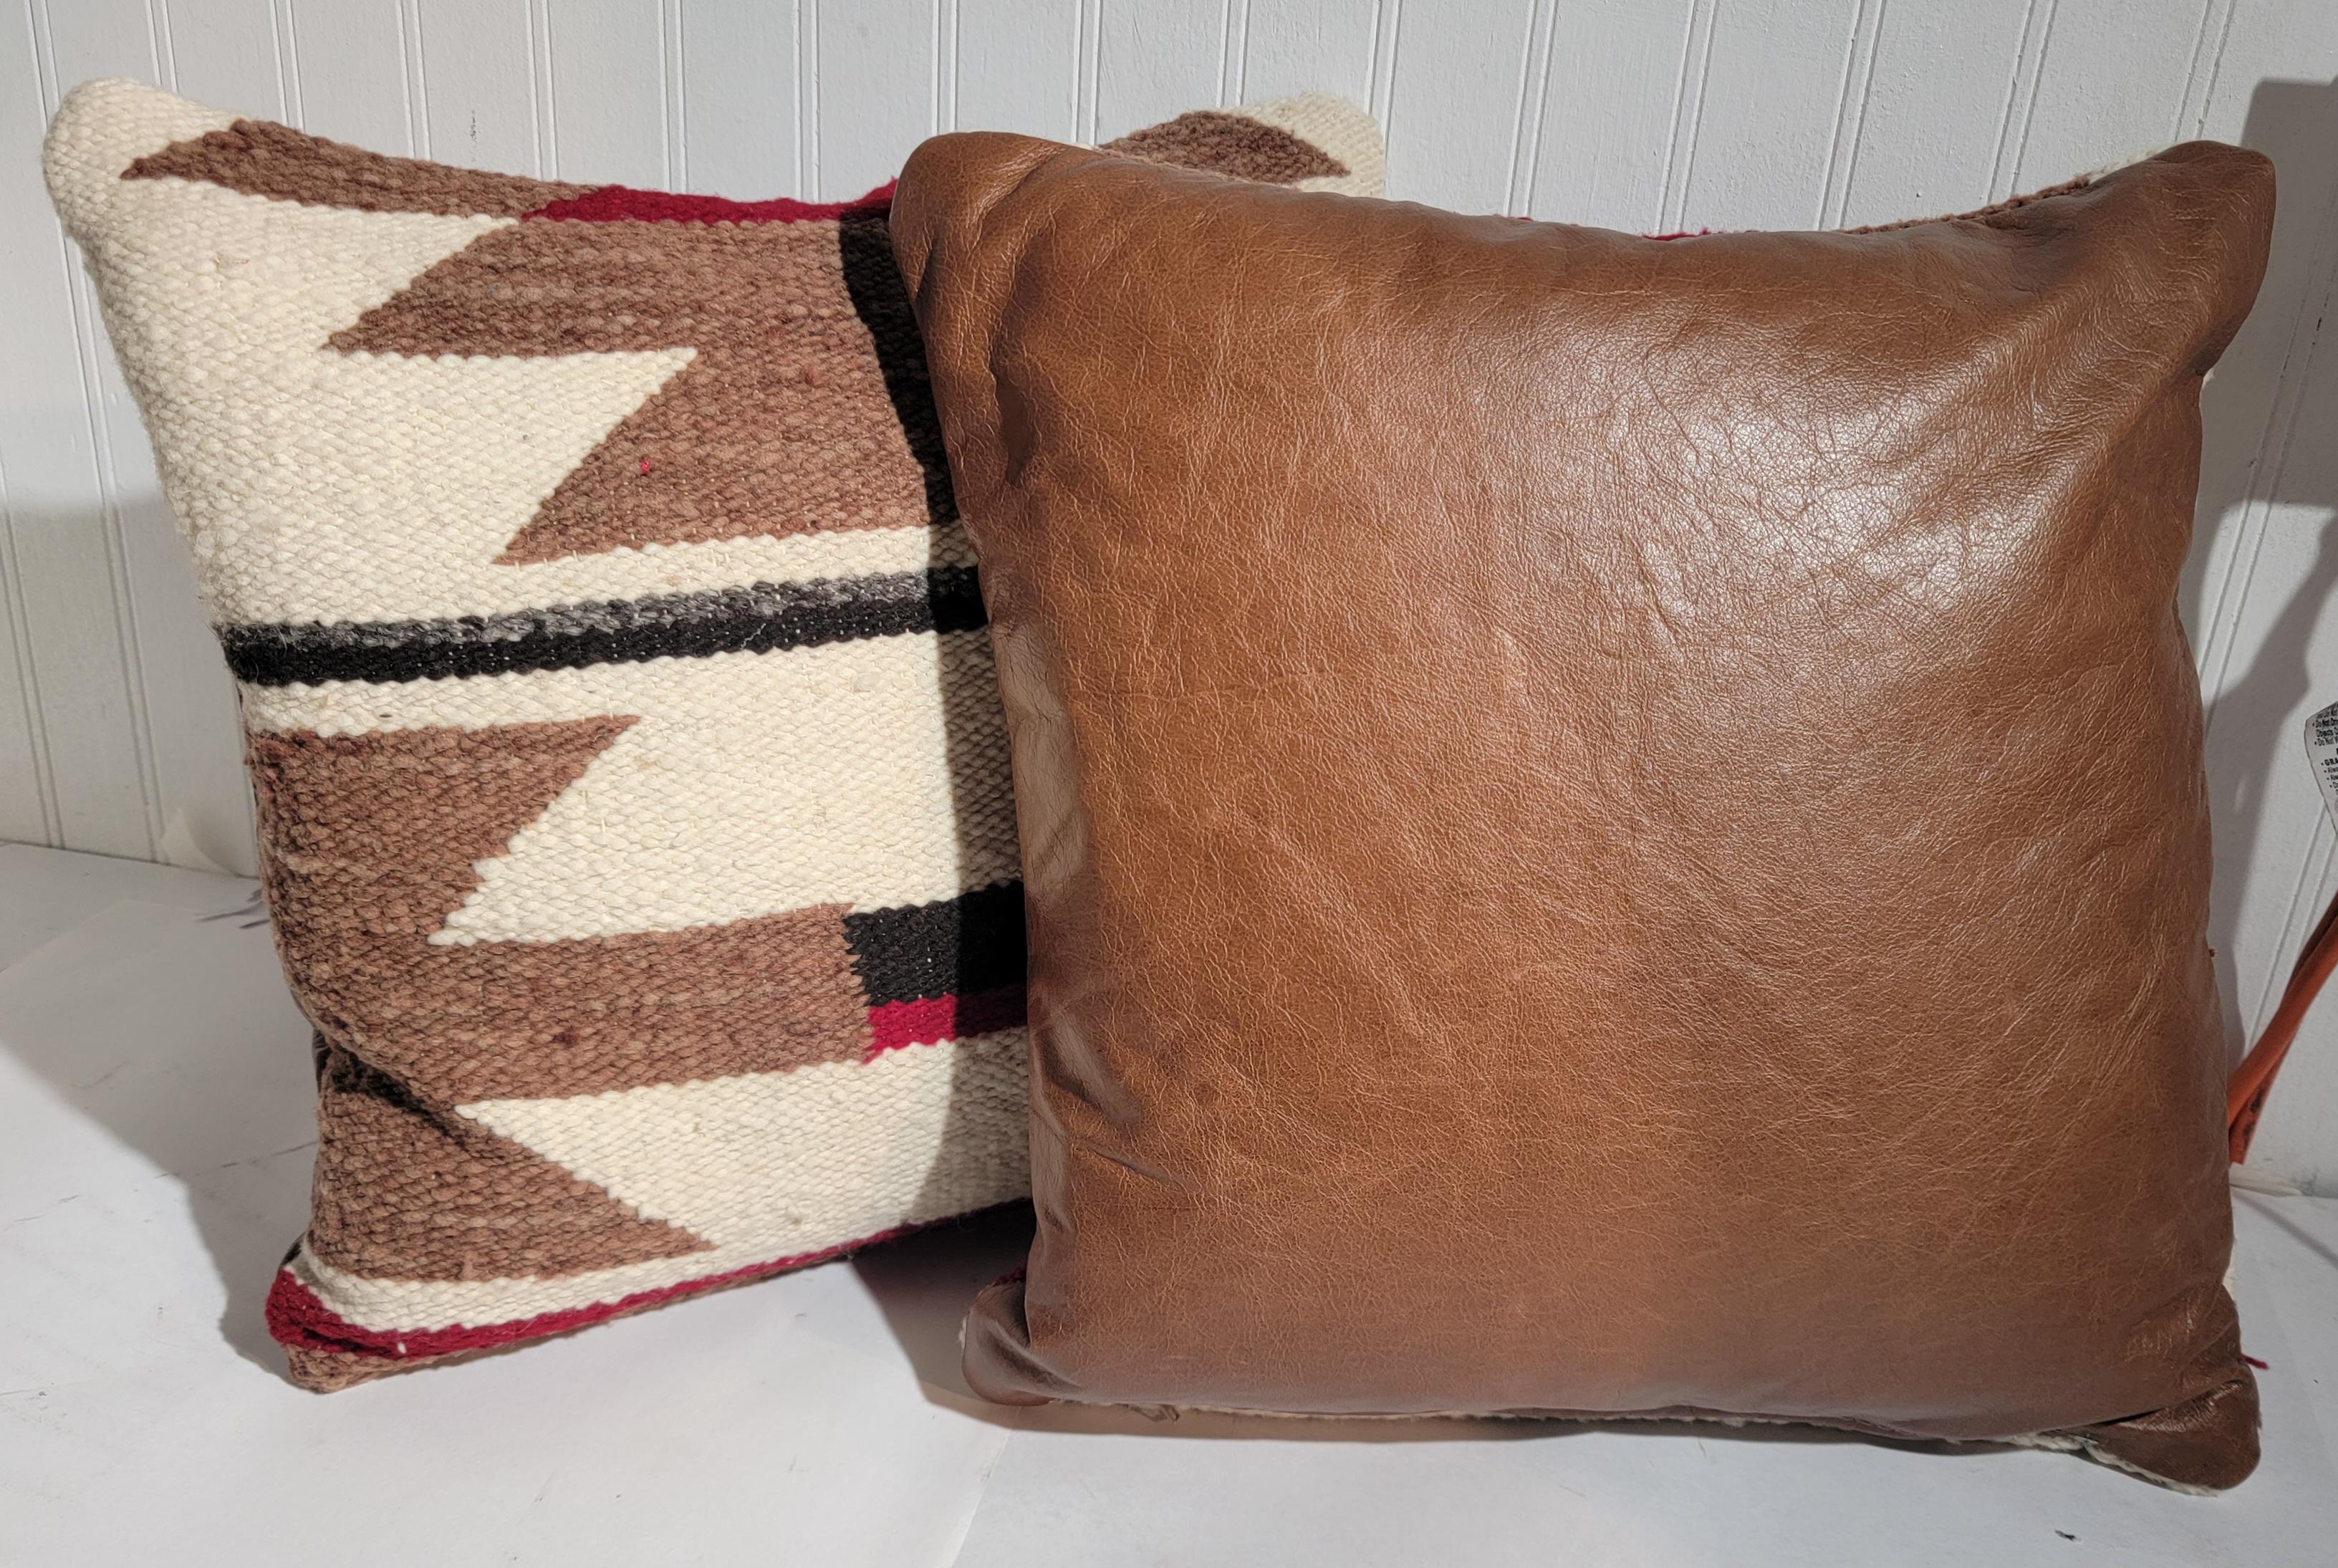 These Navajo Indian weaving pillows have fine leather backings and in very good condition.Sold as a pair only.